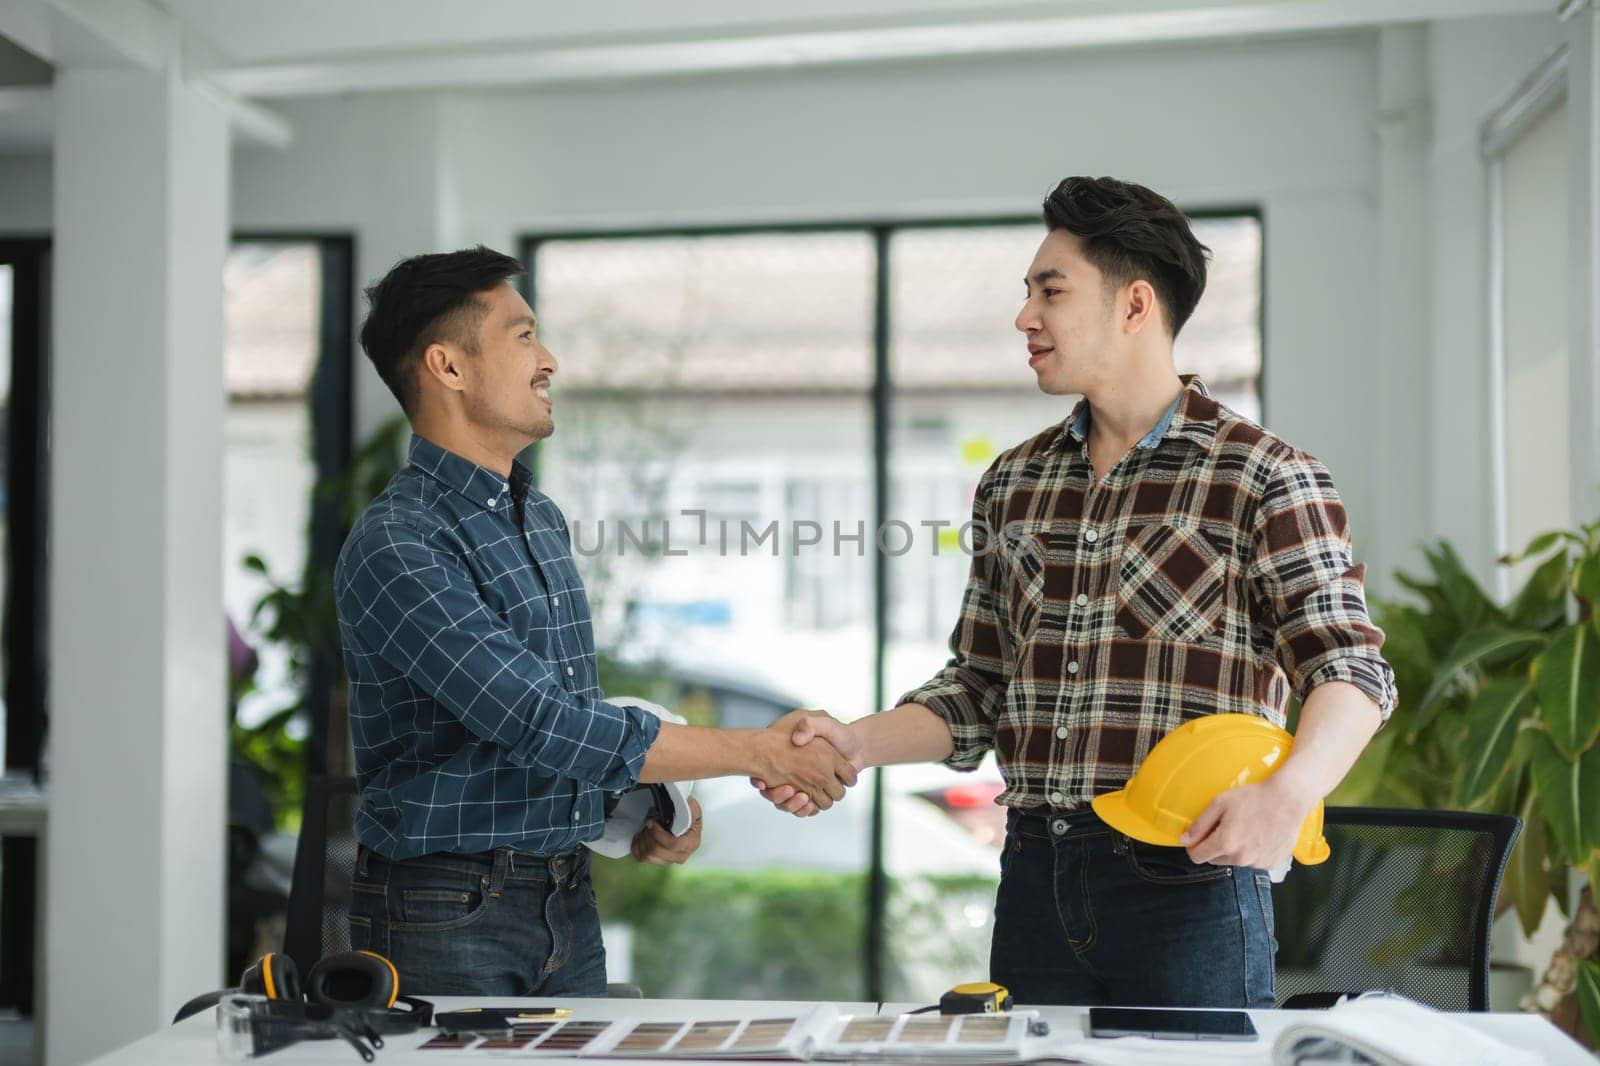 Two male engineers in a modern office, shaking hands and discussing project plans, showcasing teamwork and collaboration in a professional environment.